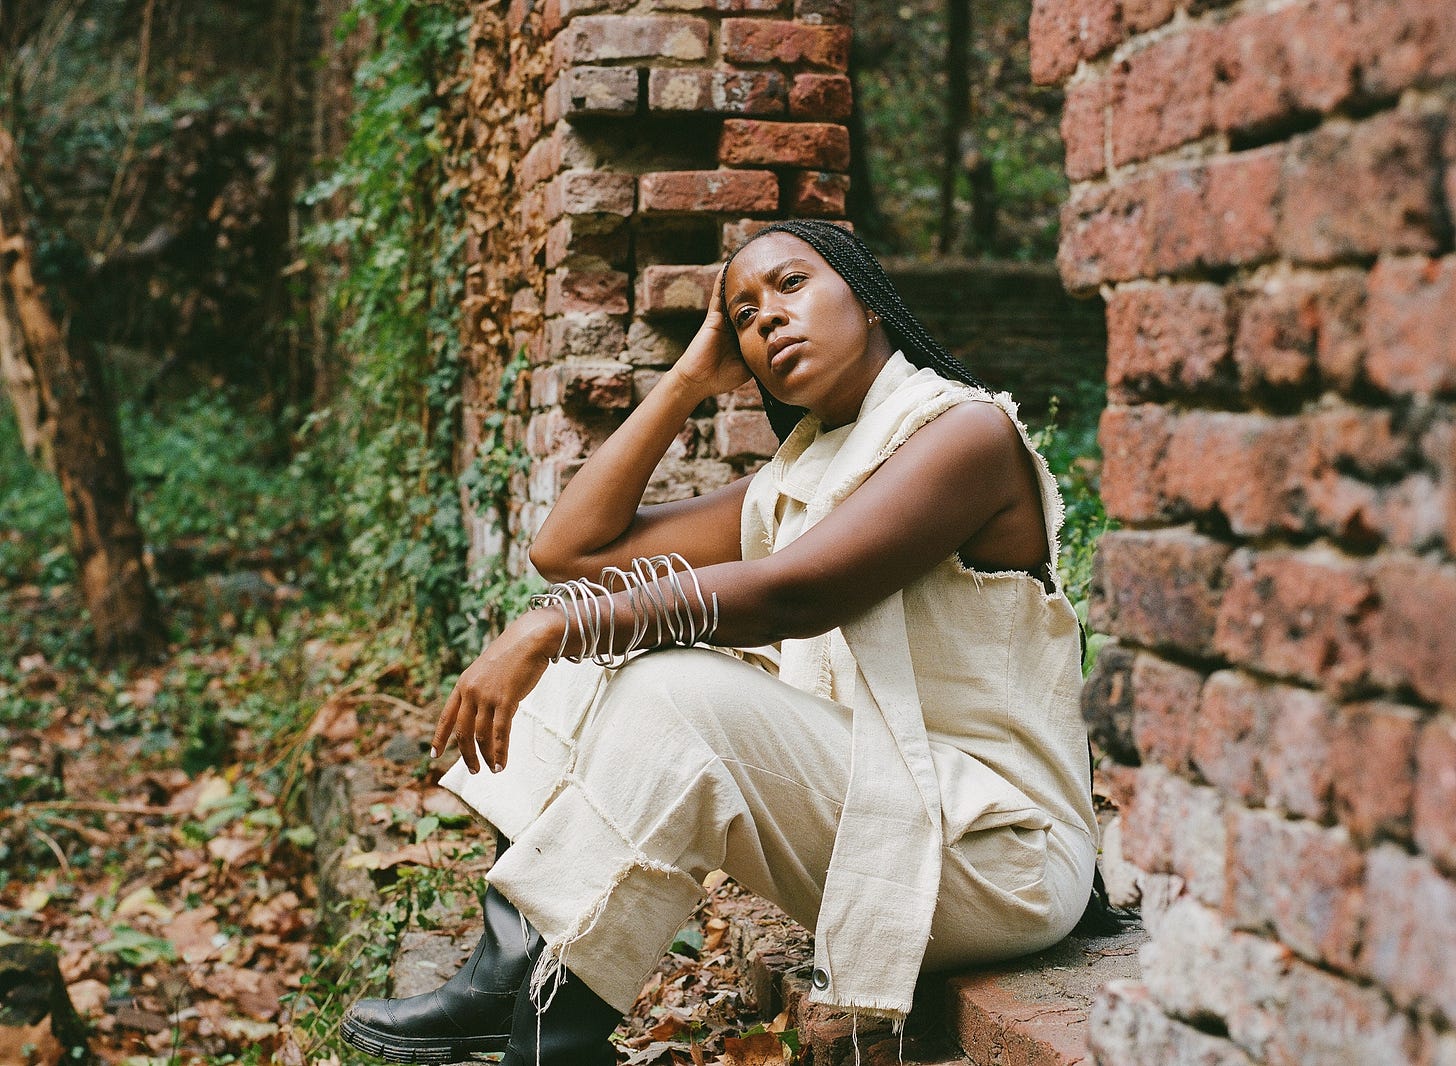 Image Description: I am wearing long black braids, an unbleached cotton jumpsuit canvas jumpsuit I made from drop cloth, black rubber boots and an armature wire arm cuff sculpted around my arm while gazing away from the camera and sitting inside an opening of a decaying brick wall being reclaimed by the forest. Photography: Chukwudumebi Ezefili